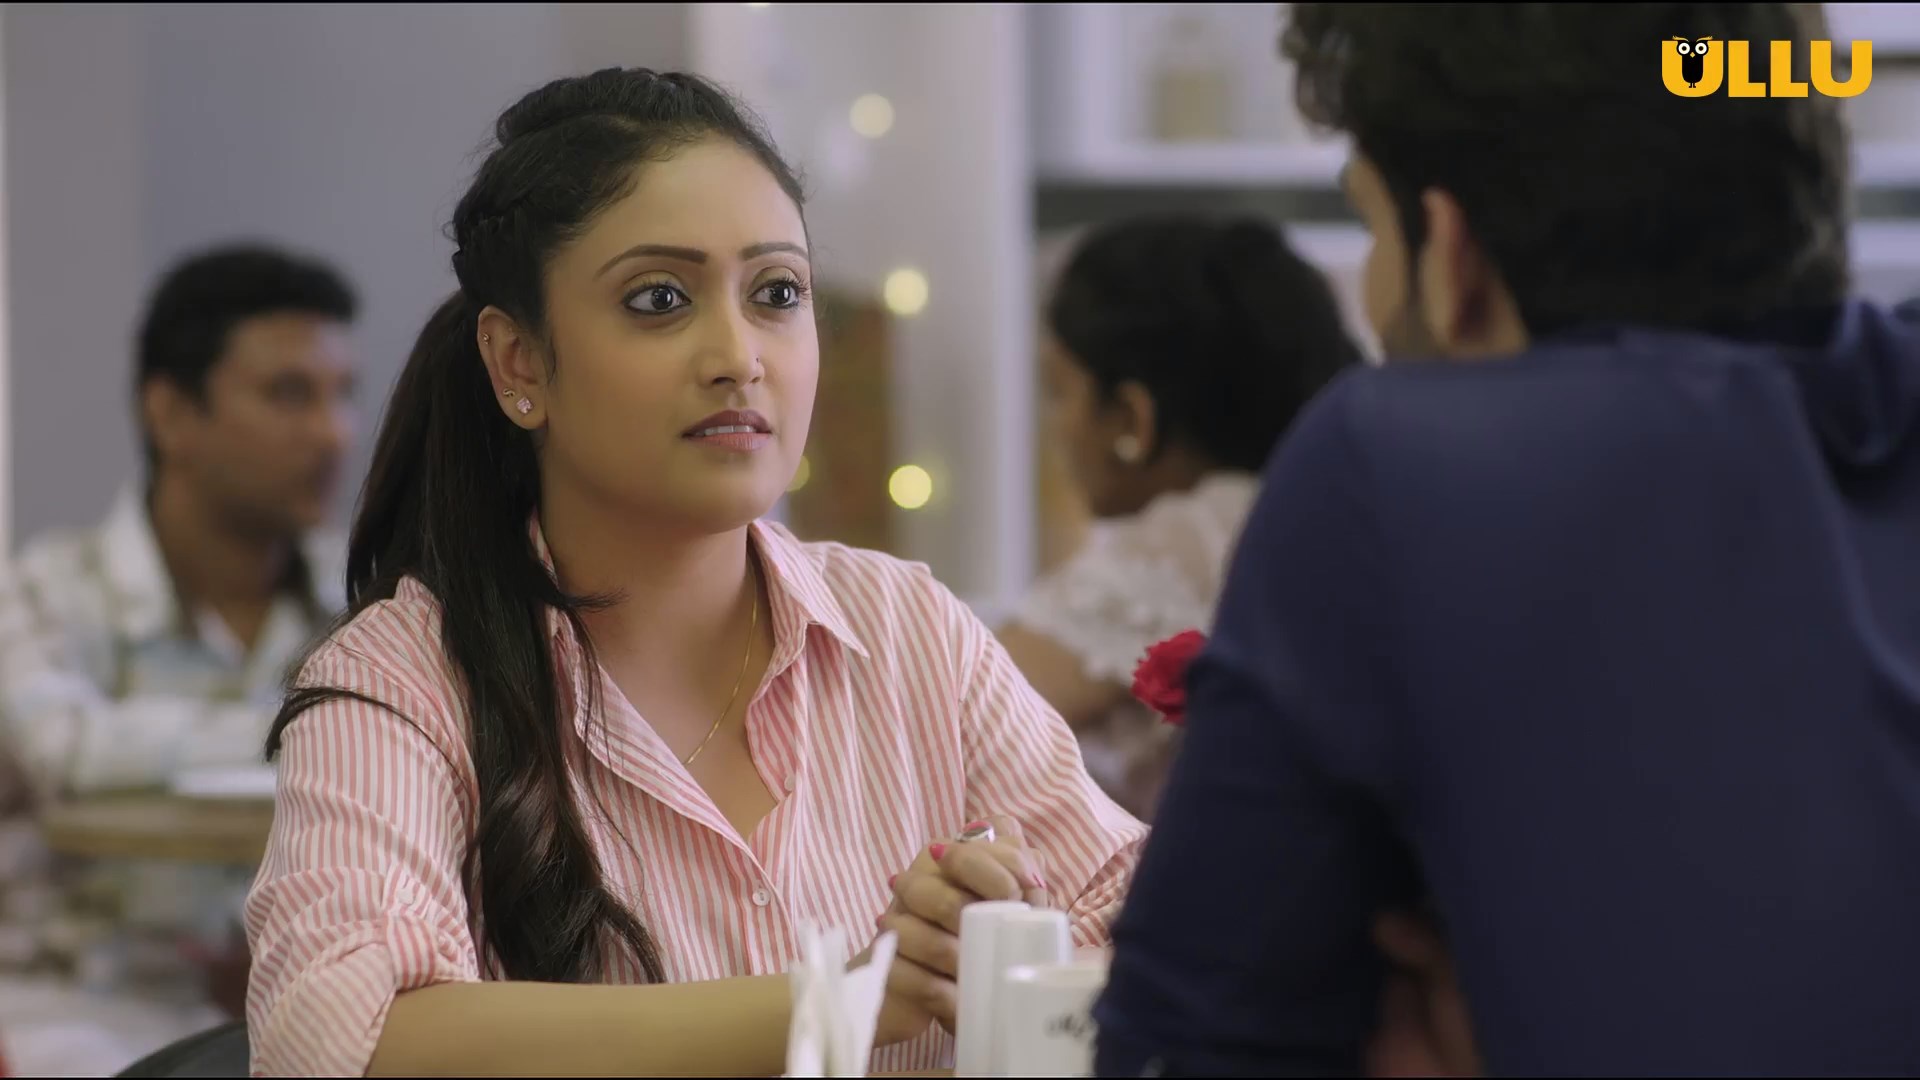 Download (18+) Hotspot (Matrimony) 2021 S01 Ullu Originals Complete Web Series 480p 720p 1080p watch and download Ullu Apps movies and web series 300MB size